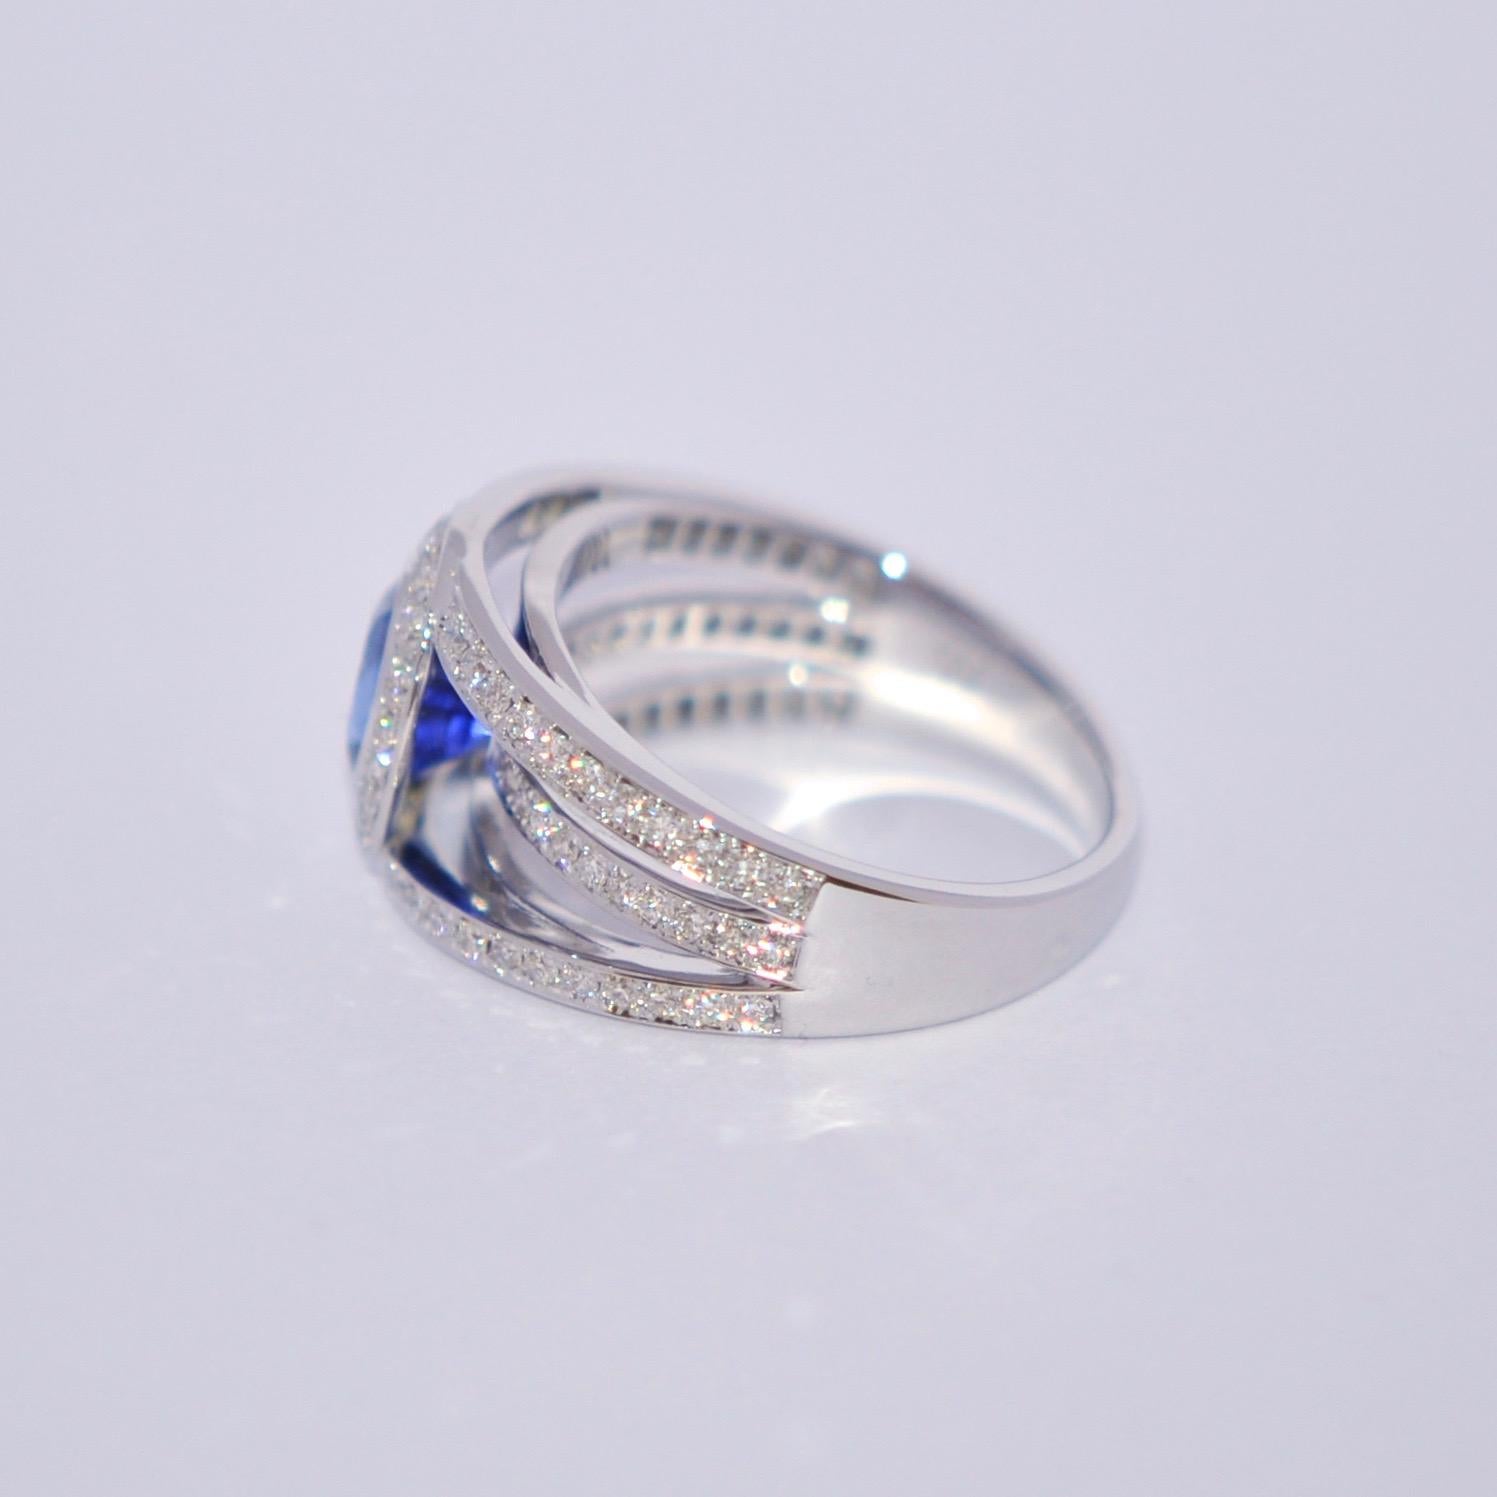 Oval Cut Sapphire and White Diamonds on White Gold 18 Karat Engagement Ring